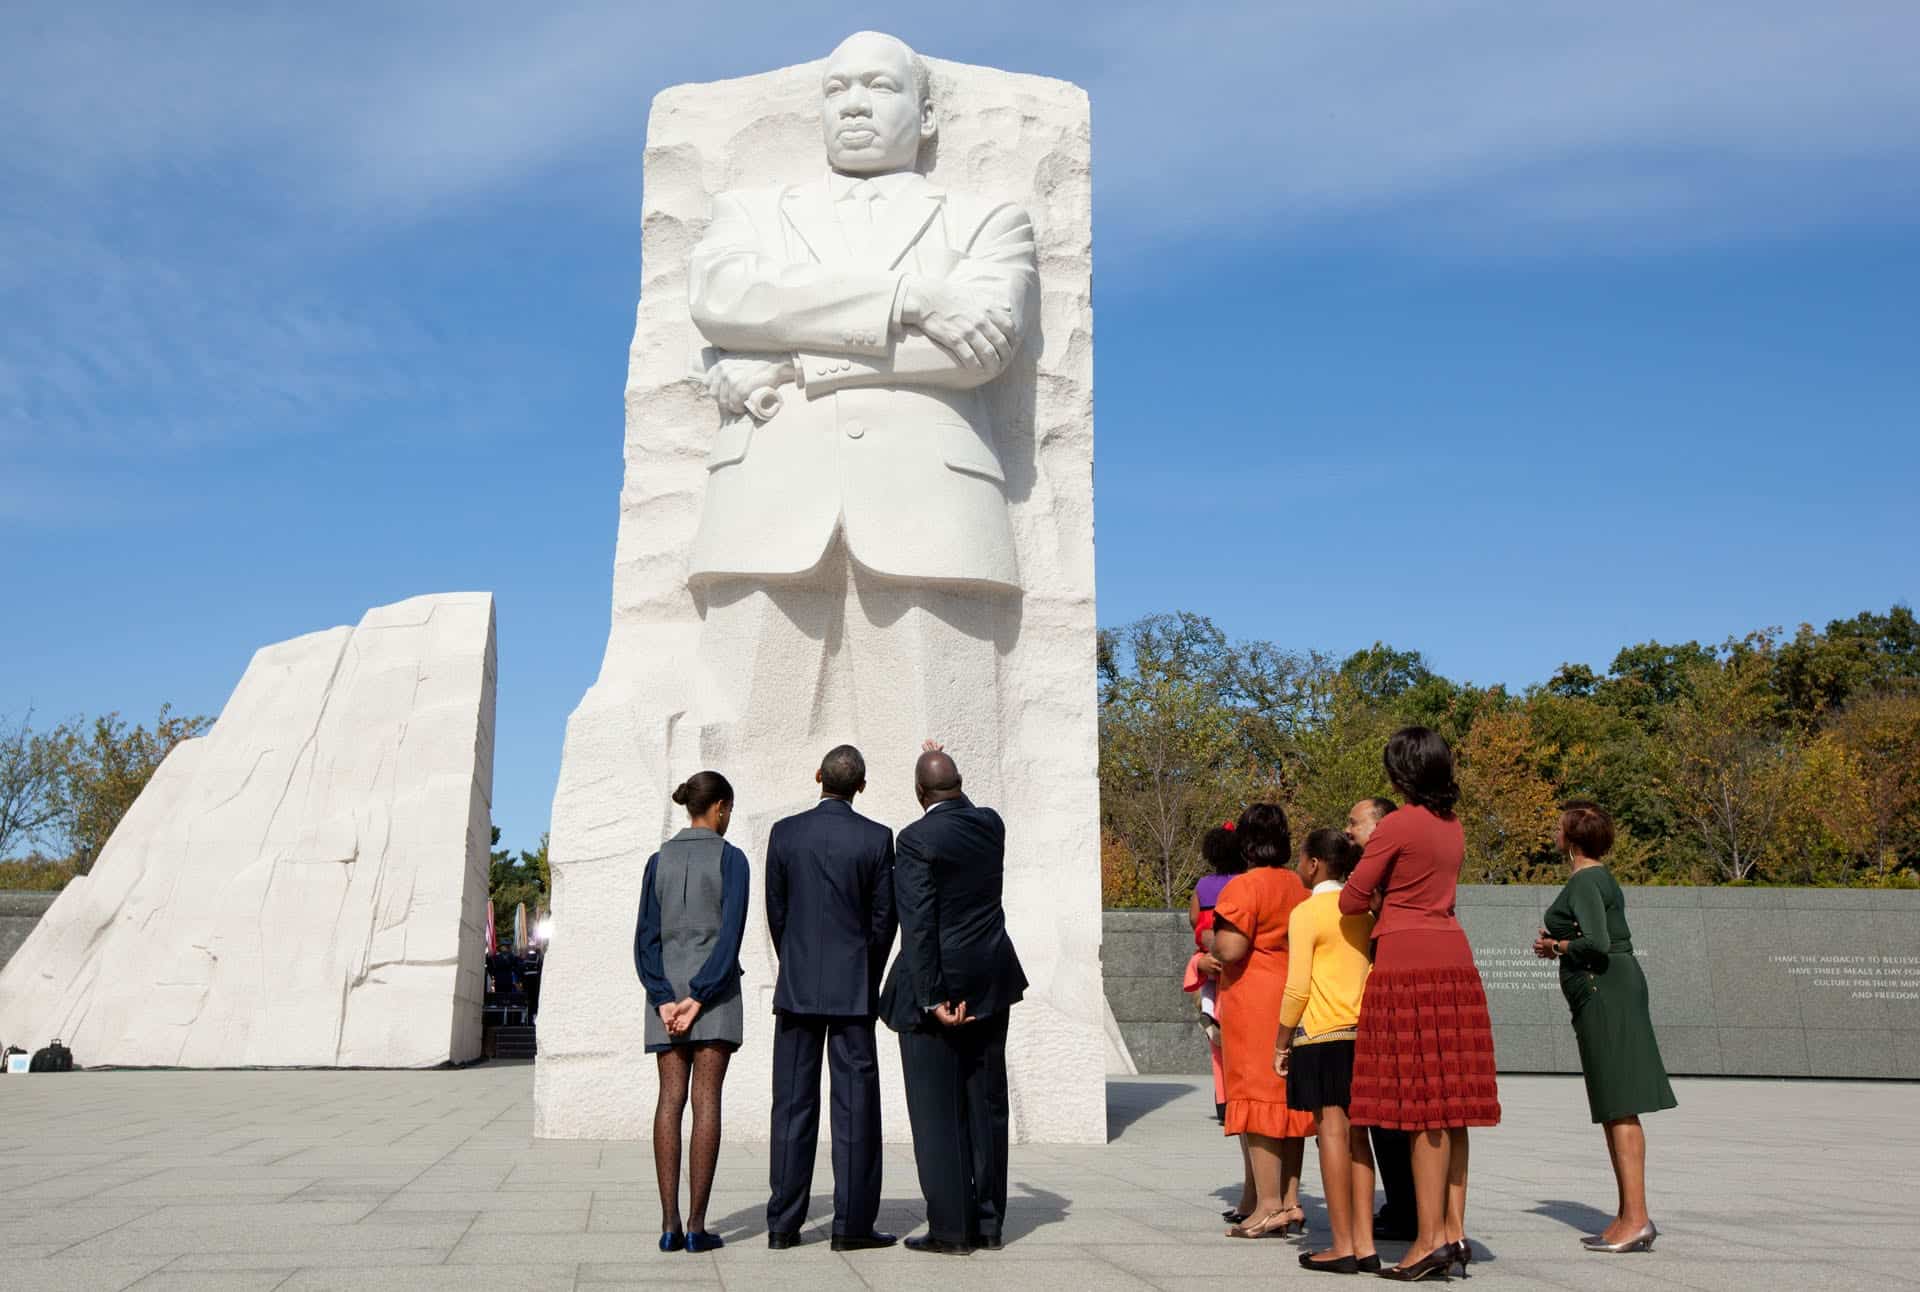 President Obama and the First Family visiting Dr. King's Memorial in Washington, DC.